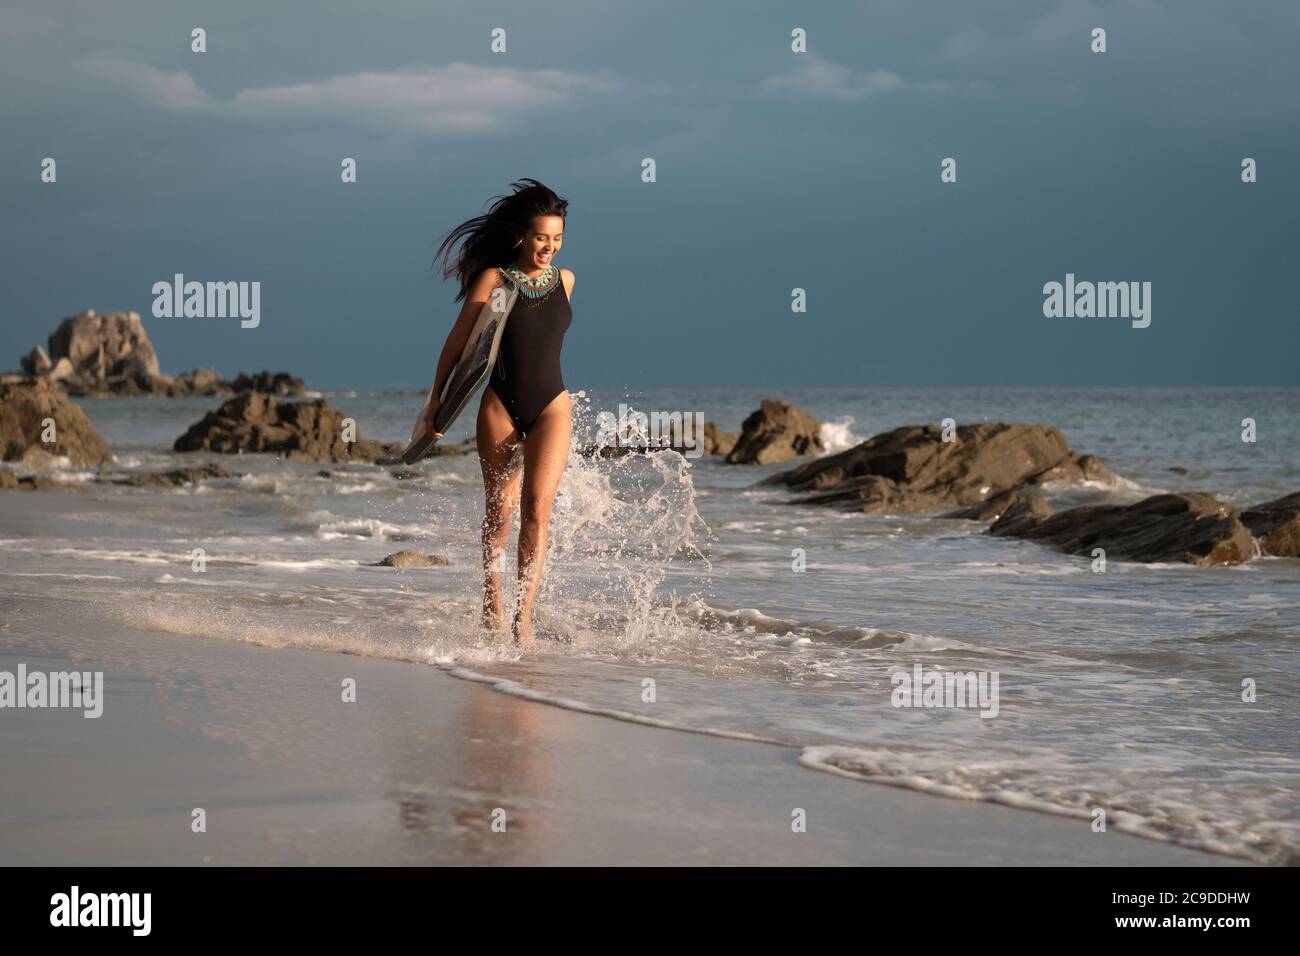 Young woman with boogie board running at a rocky beach on Mexico's Pacific coast Stock Photo